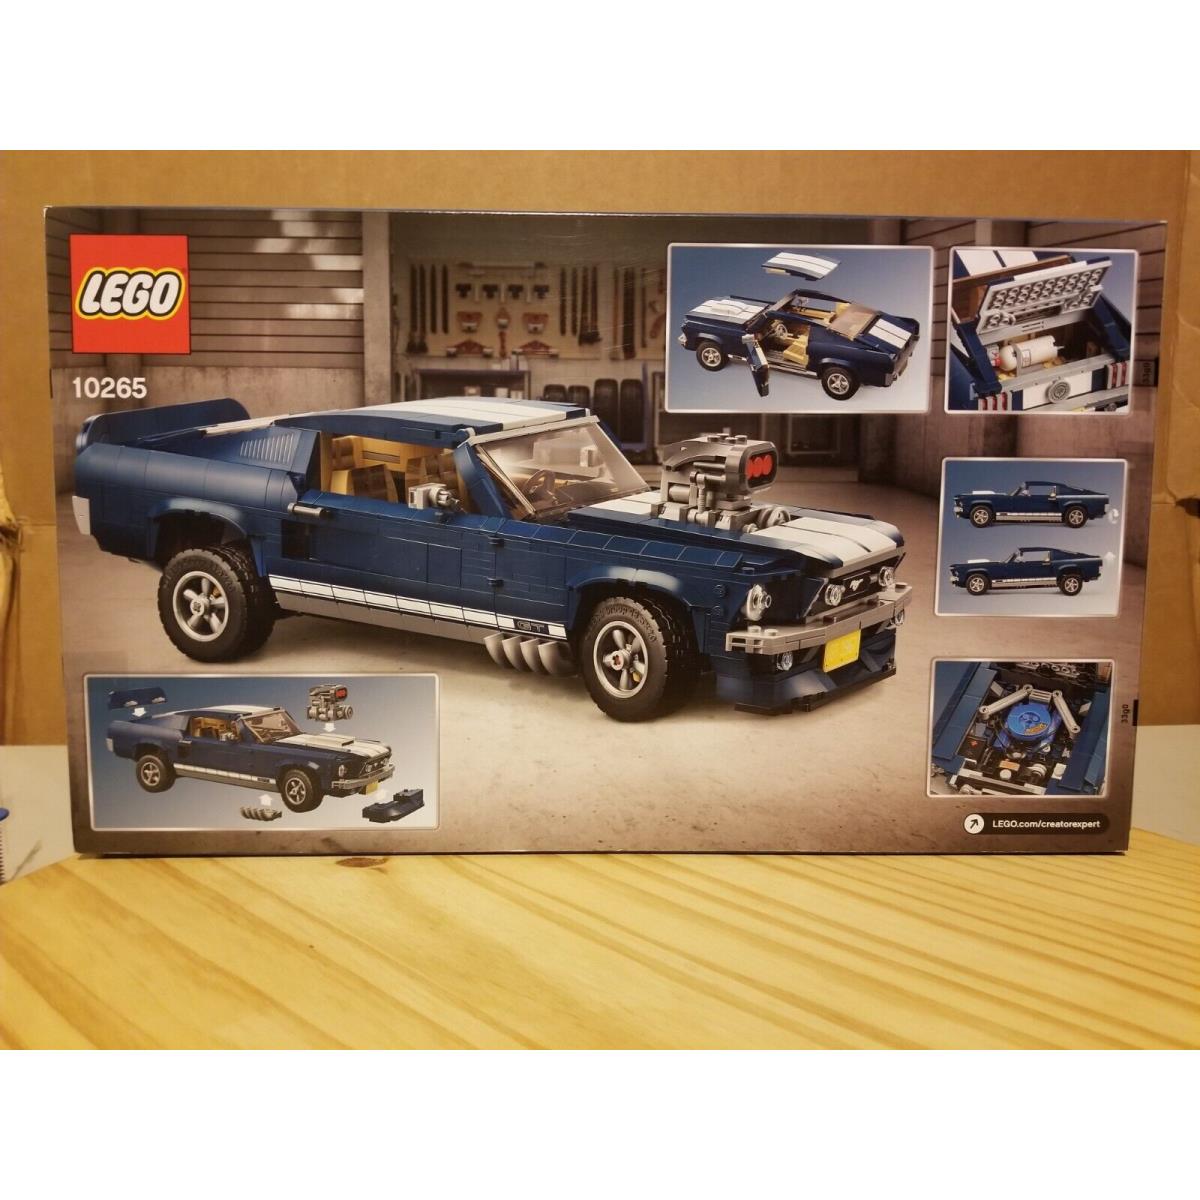 10265 Lego Ford Mustang Retired